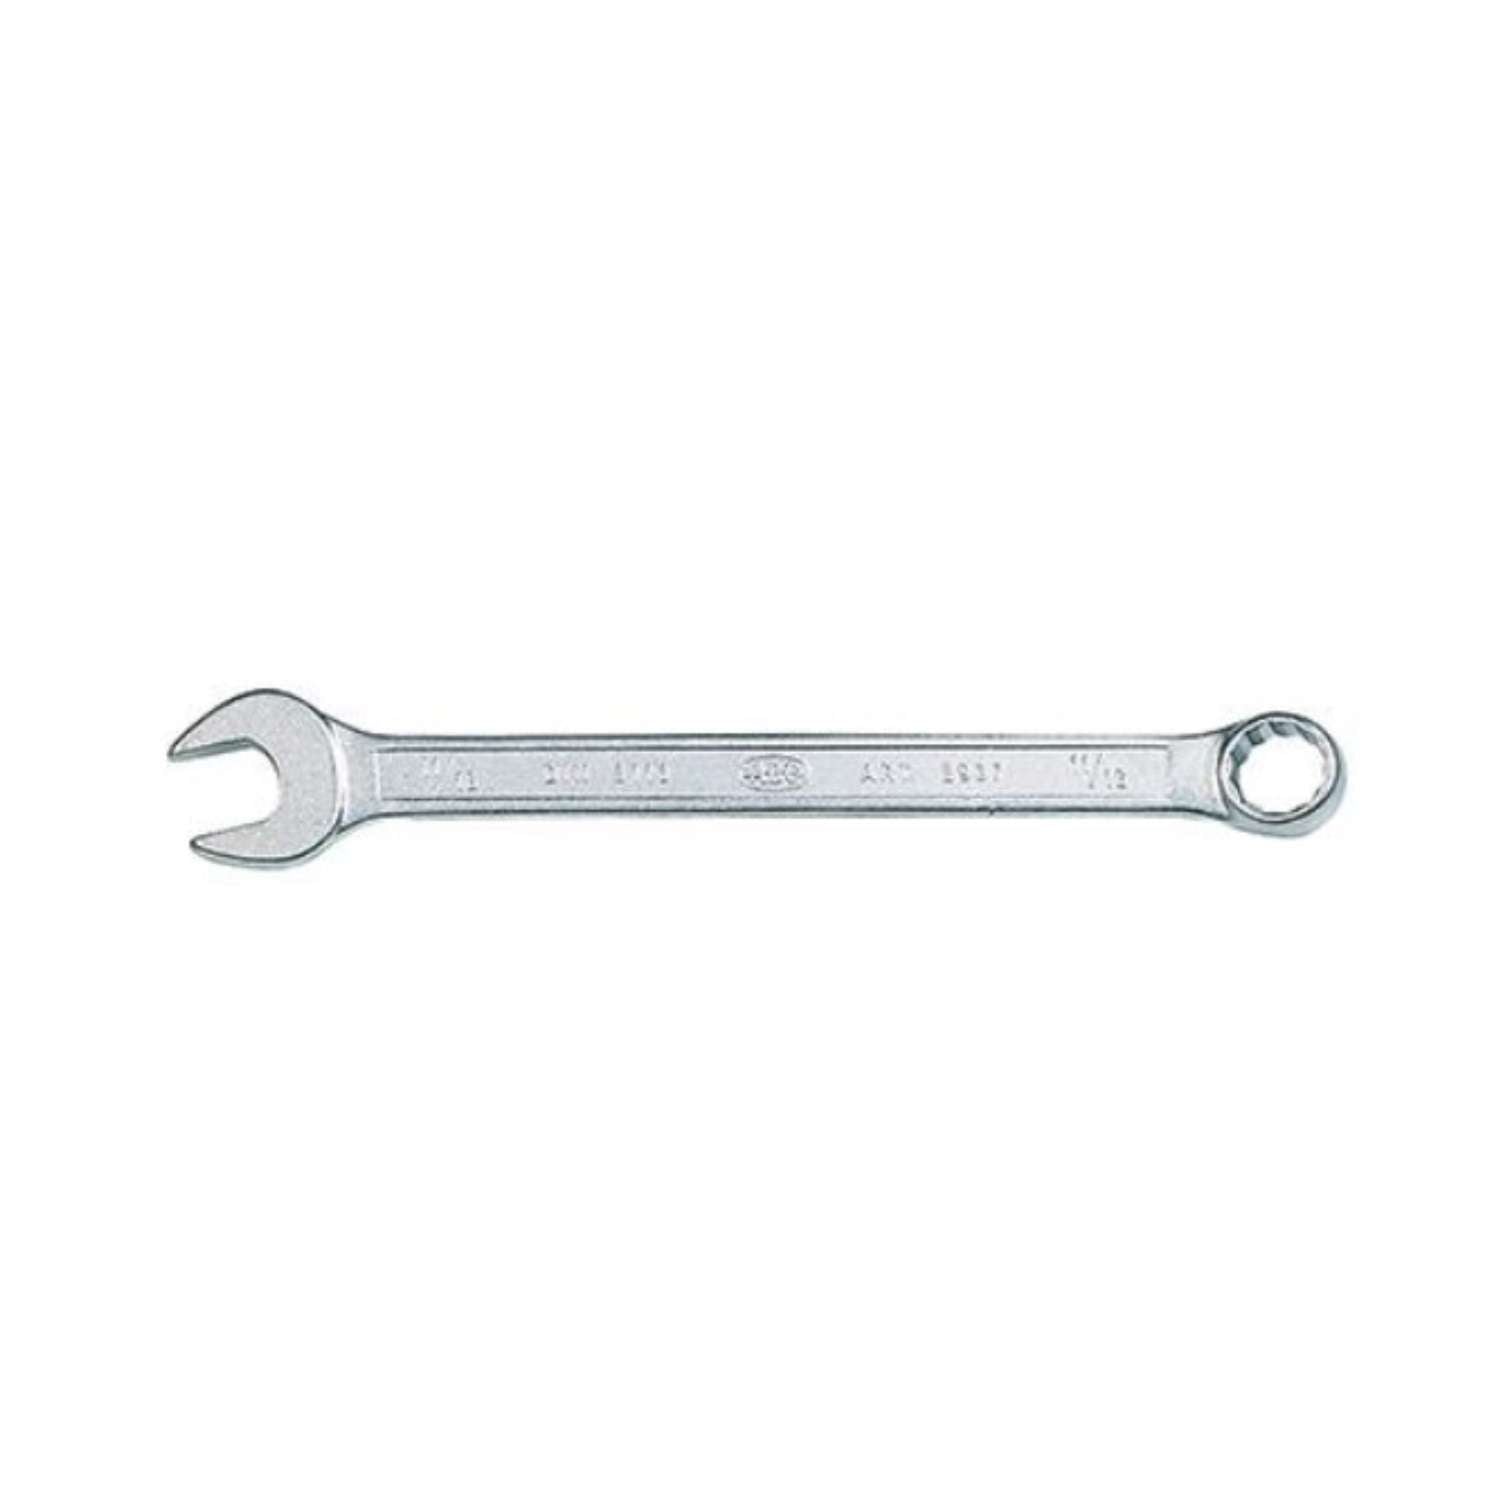 Combination spanner long type in 1/4 to 1" inch sizes A 2937 ABC